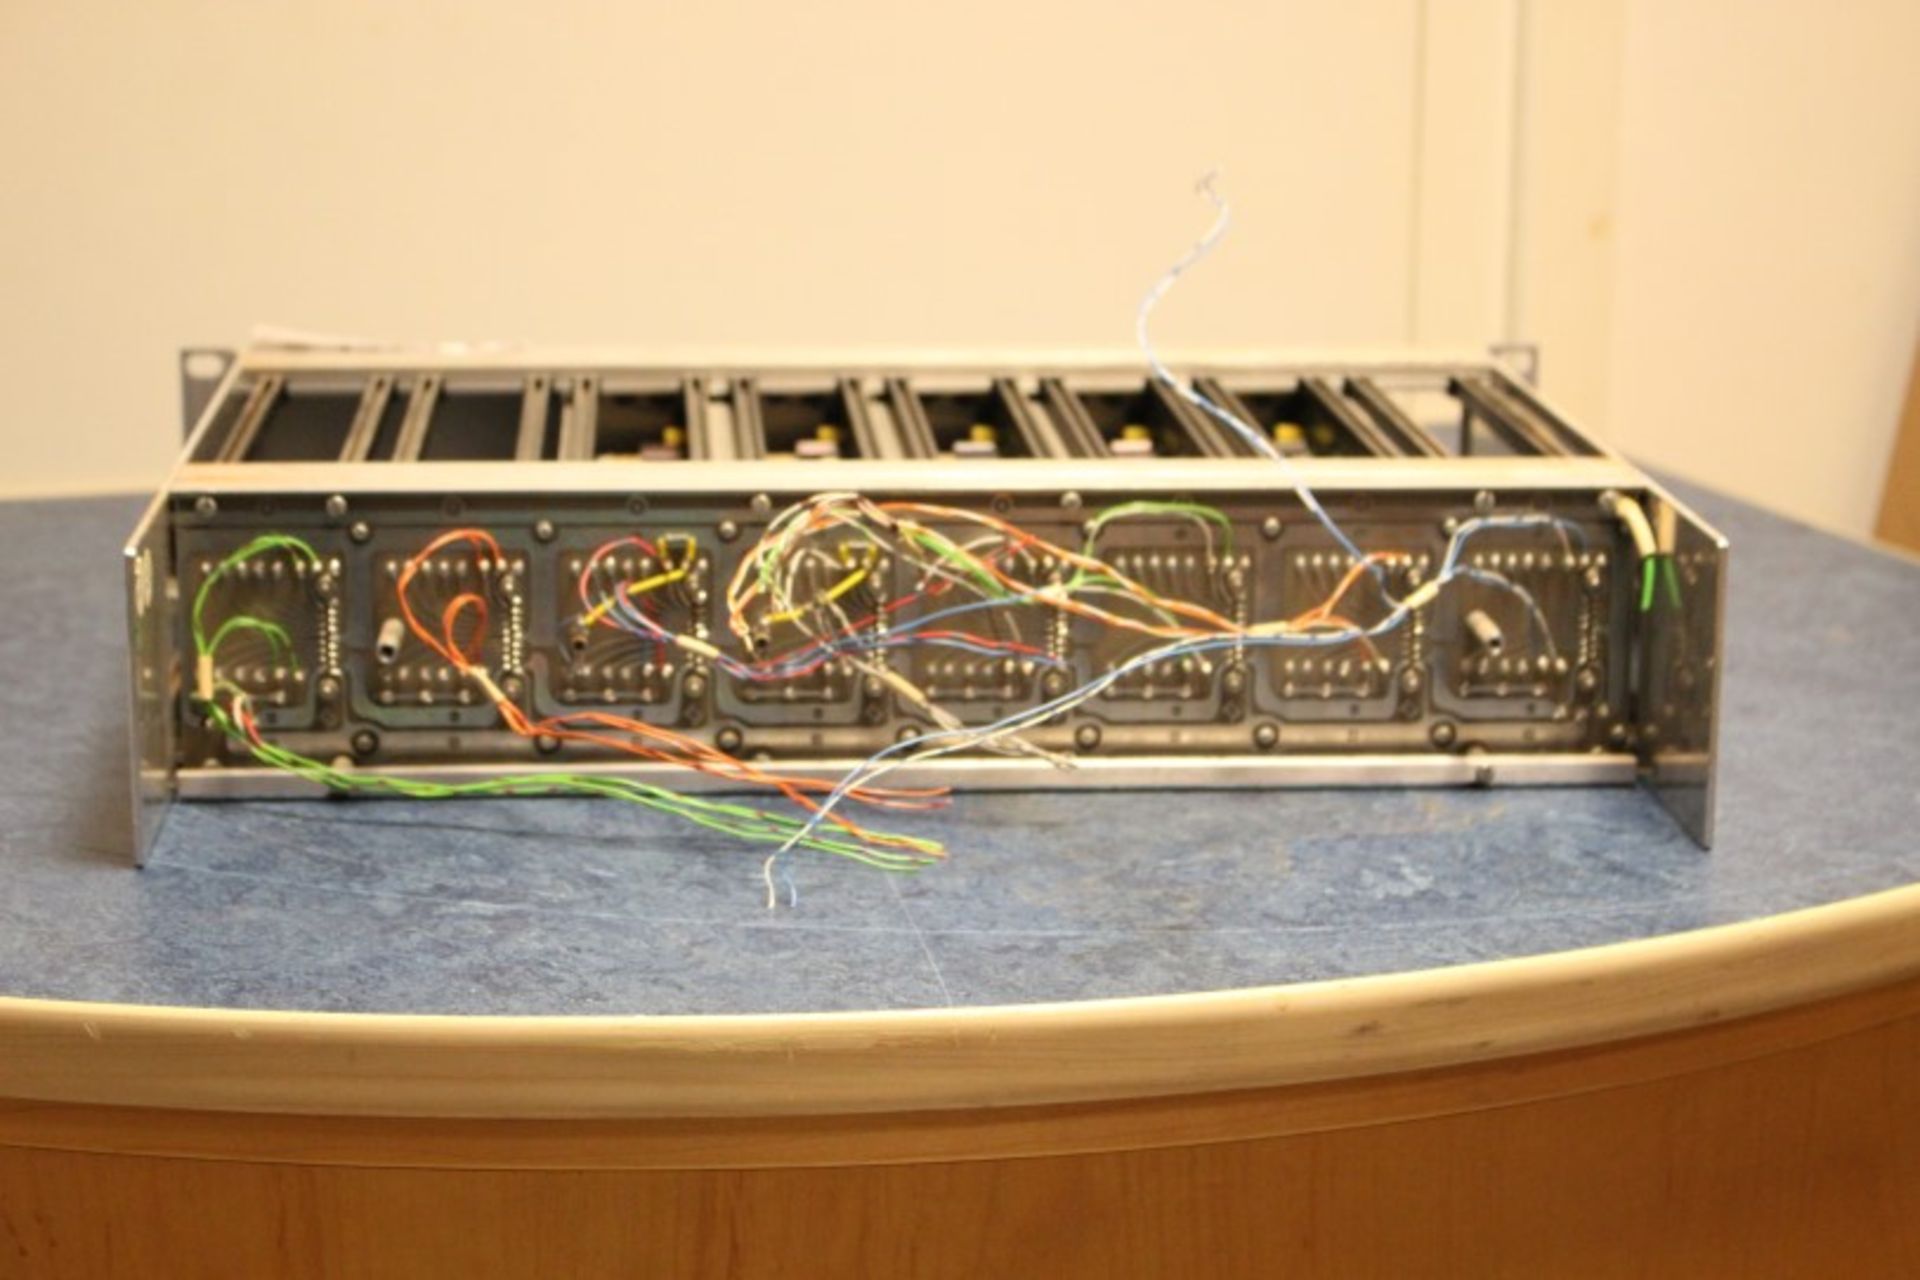 BBC Made Vintage Radio Broadcasting Amp Panel - With 5 x AM7/13 High Gain Line Amp Modules - Image 2 of 2